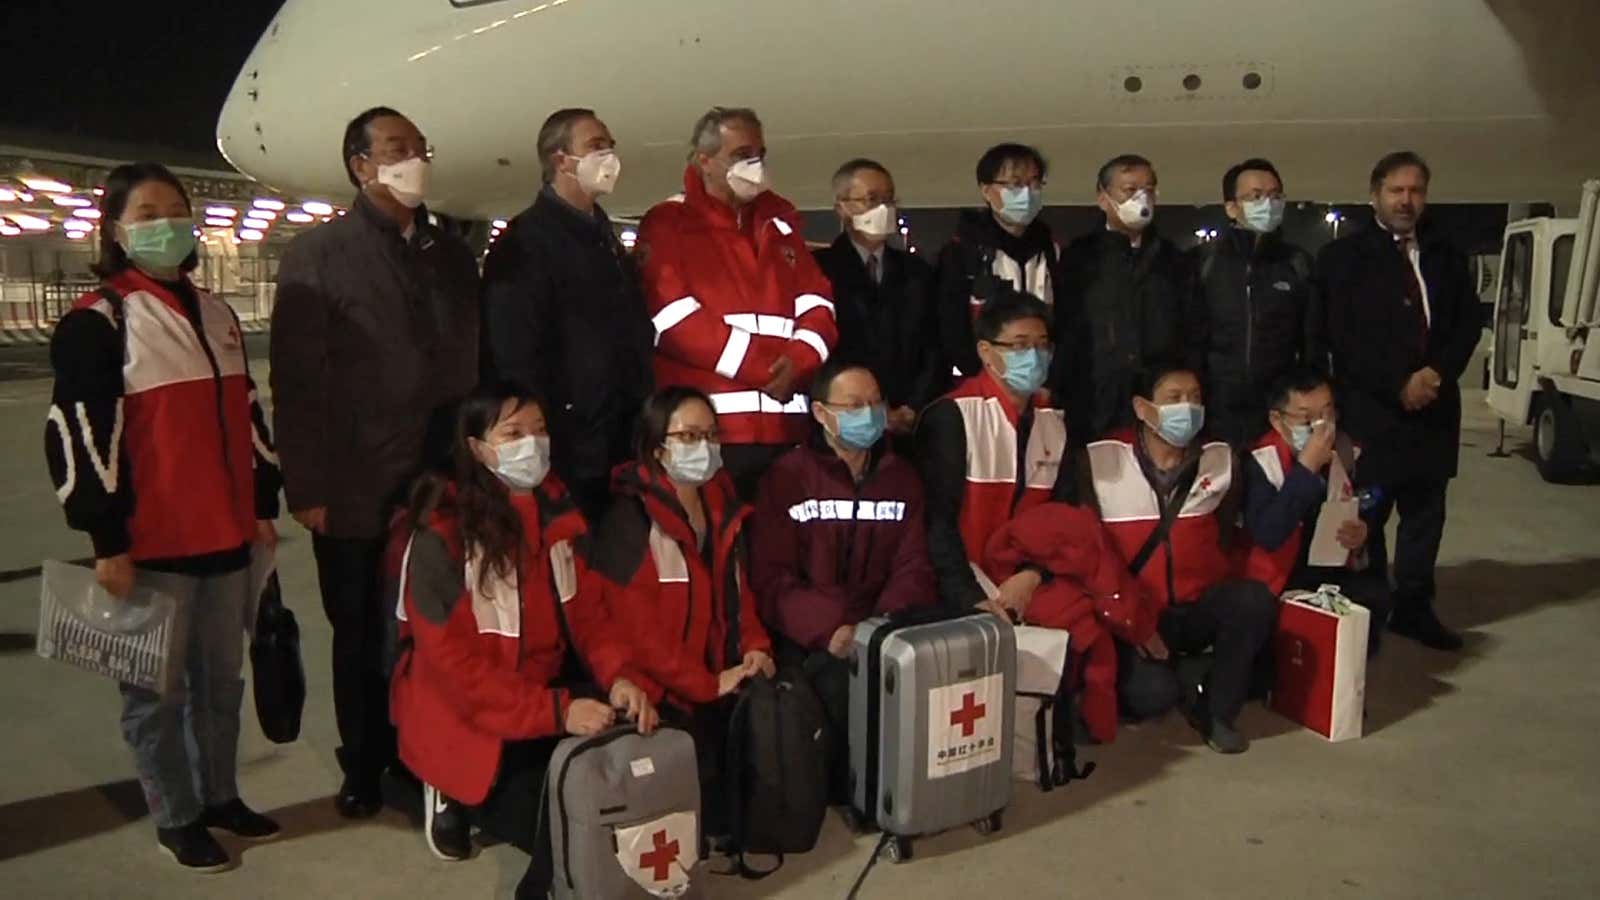 A team of Covid-19 experts from China, carrying supplies. meets the head of the Italian Red Cross at an airport in Rome.